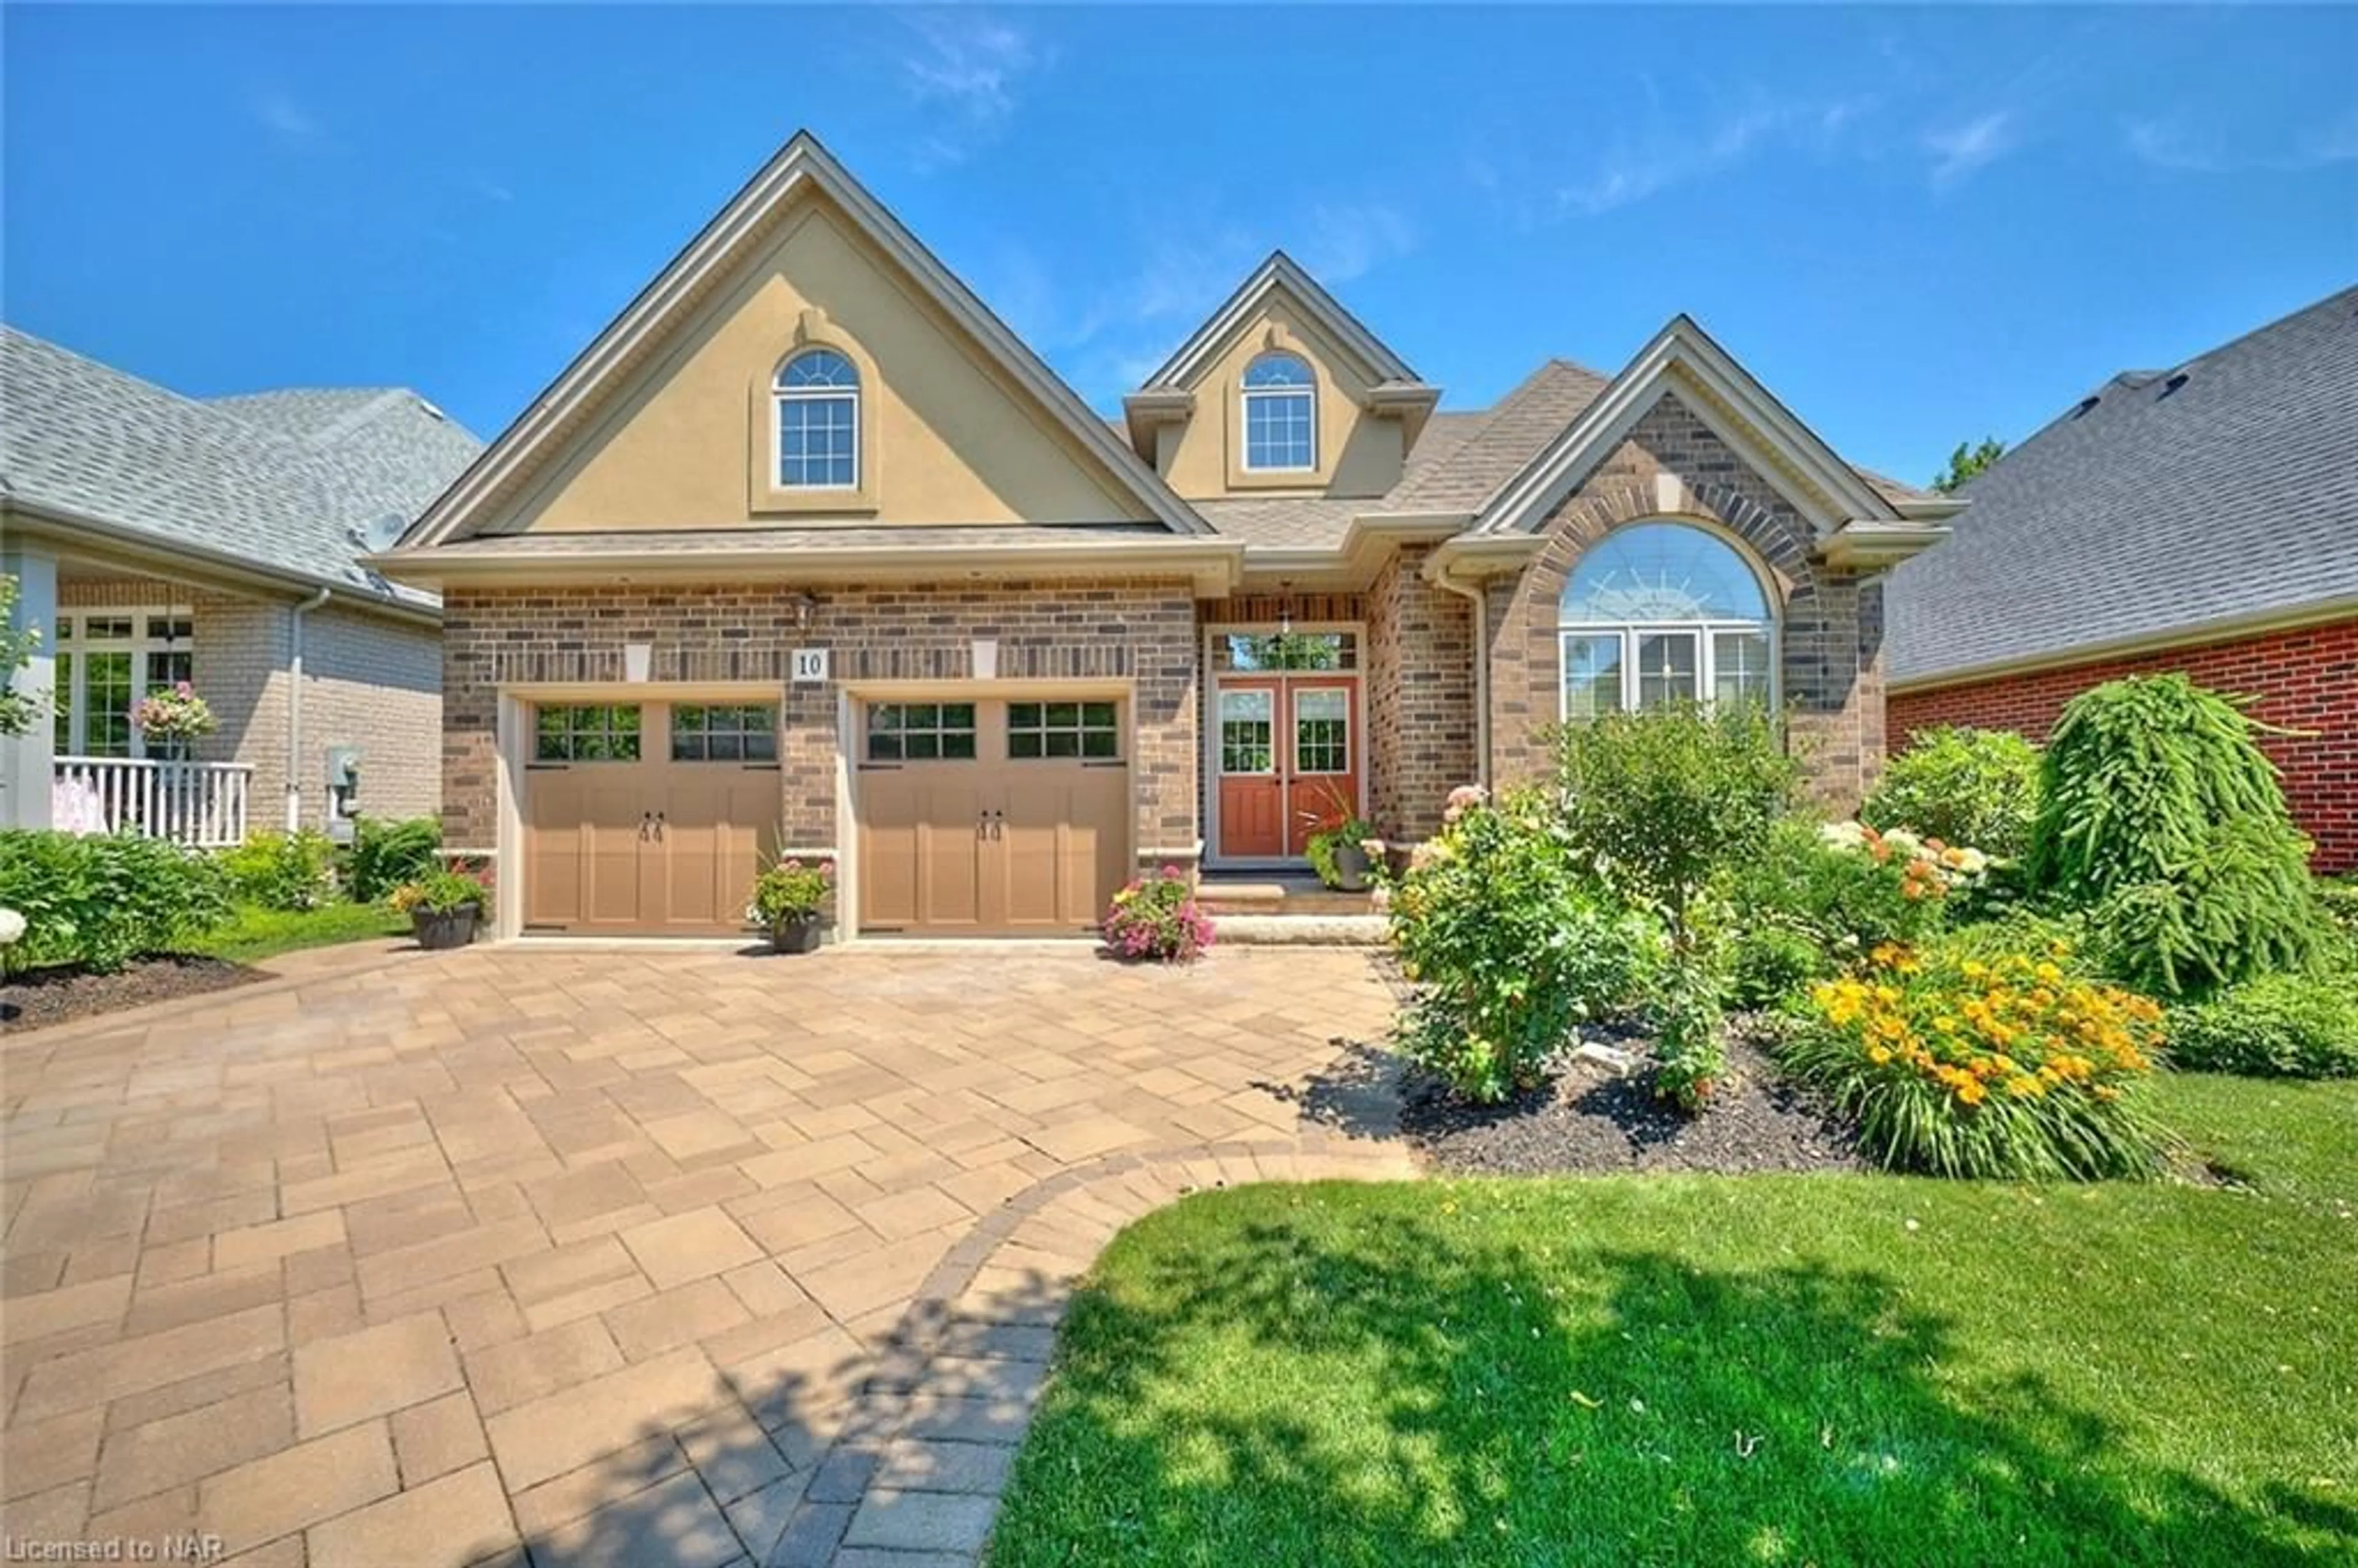 Home with brick exterior material for 10 Tulip Tree Rd, Niagara-on-the-Lake Ontario L0S 1J1